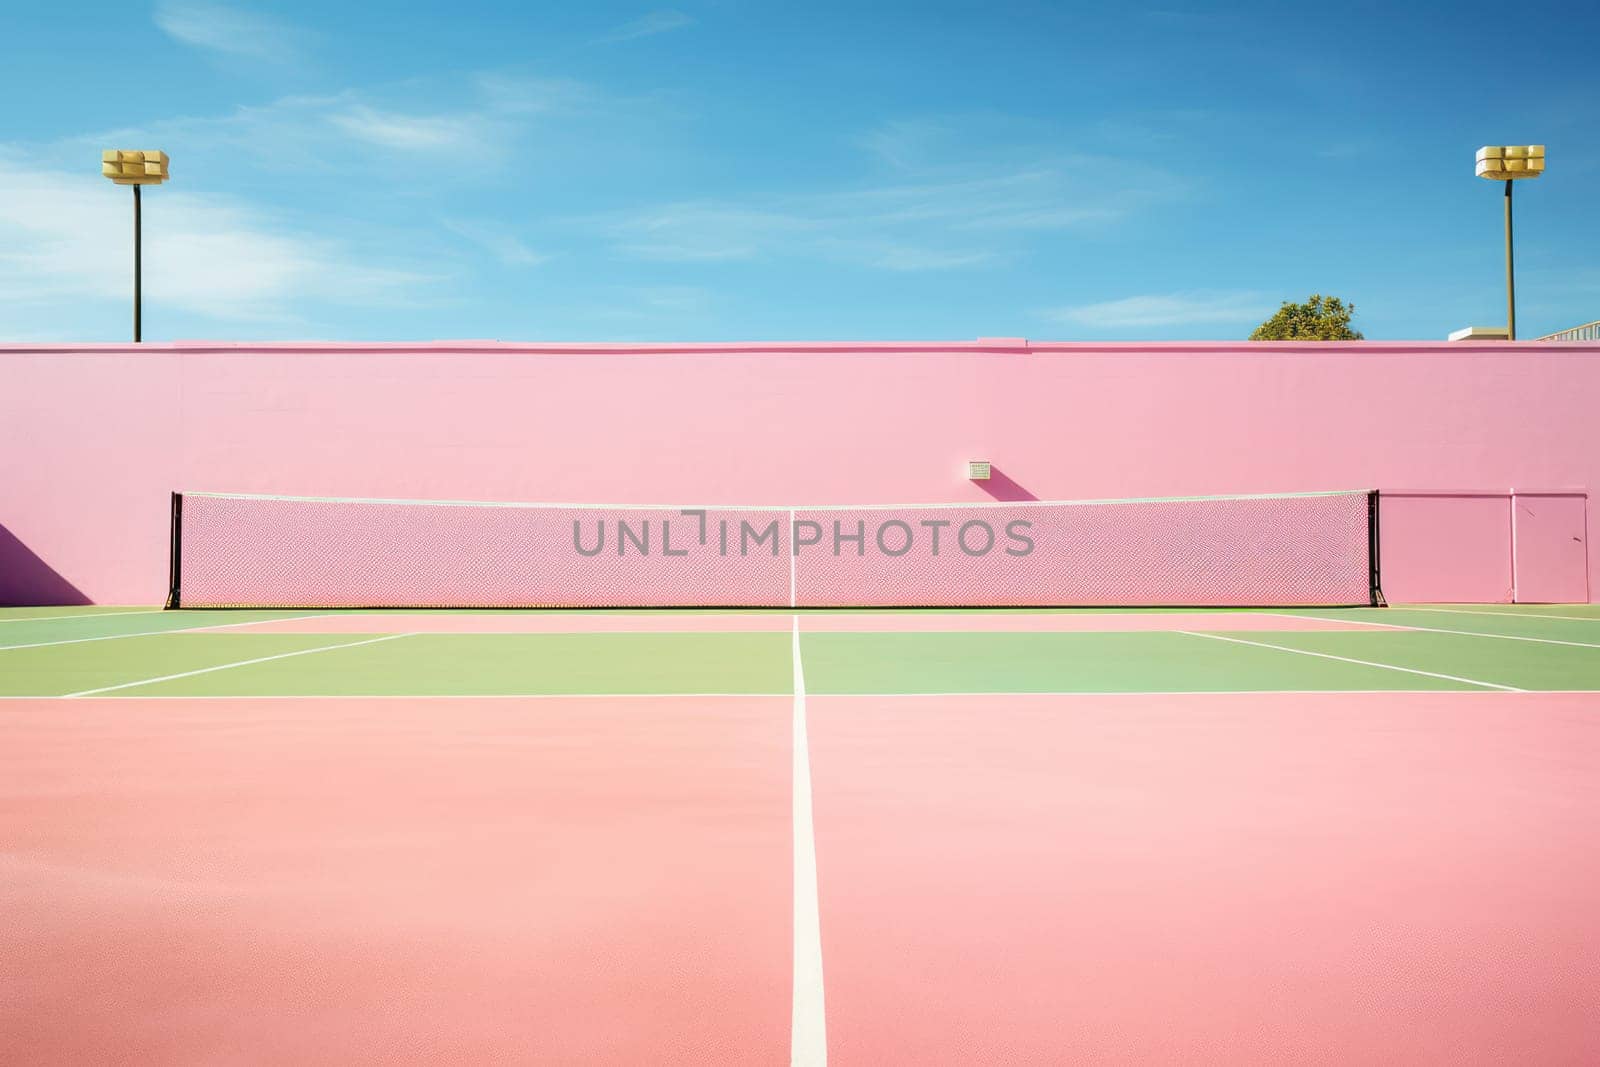 Active leisure in nature: Professional tennis match on a clay court with a vibrant red surface, set against a beautiful blue sky and green field. Empty court with players engaged in intense competition, showcasing technique and skill. Tennis equipment, white lines, and a net provide a textured backdrop for this stunning drone view.